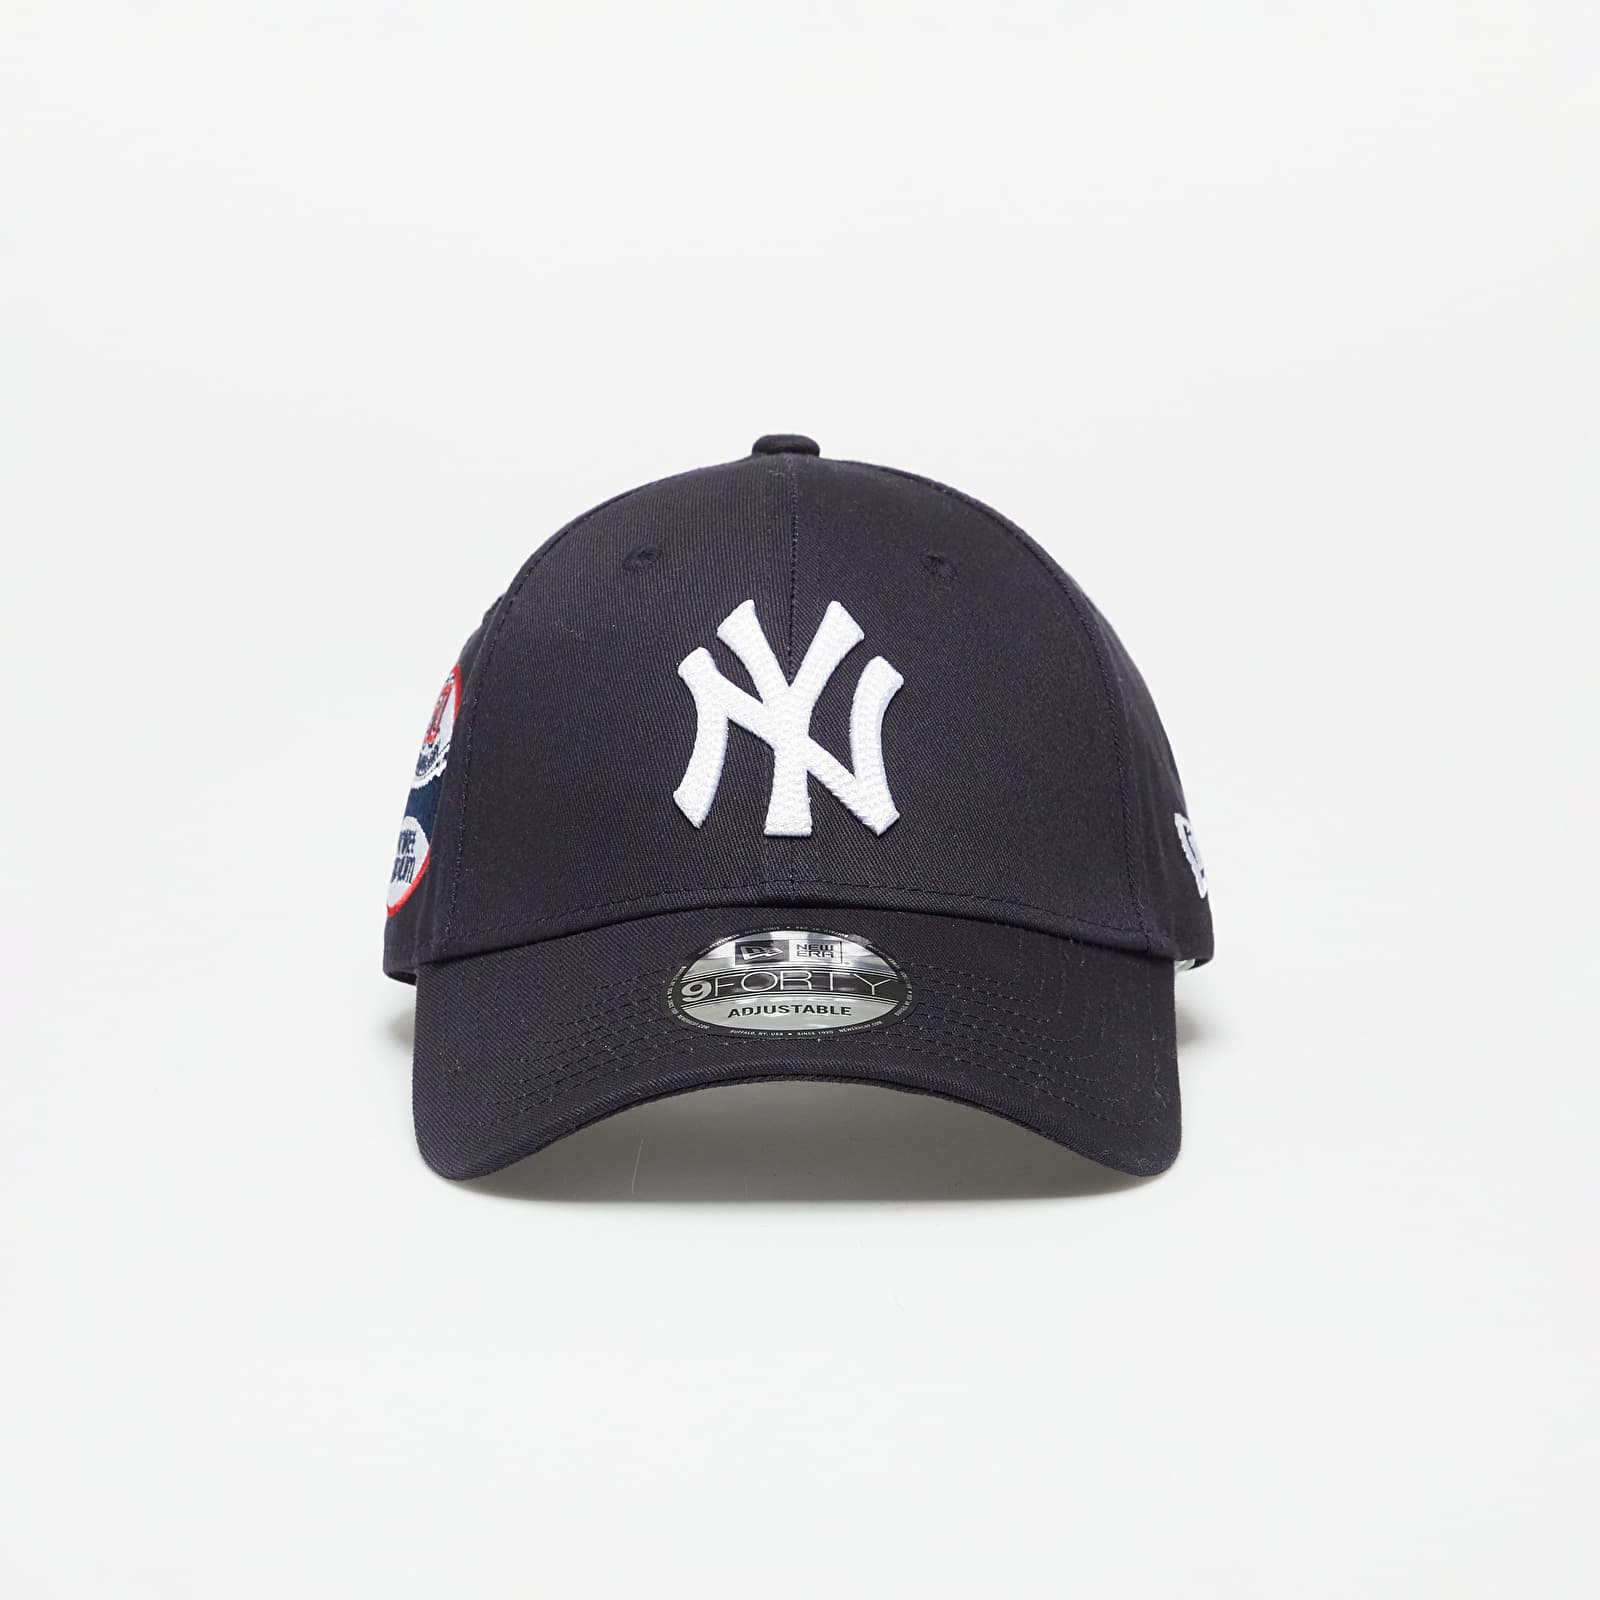 Caps New Era New York Yankees New Traditions 9FORTY Adjustable Cap Navy/ White